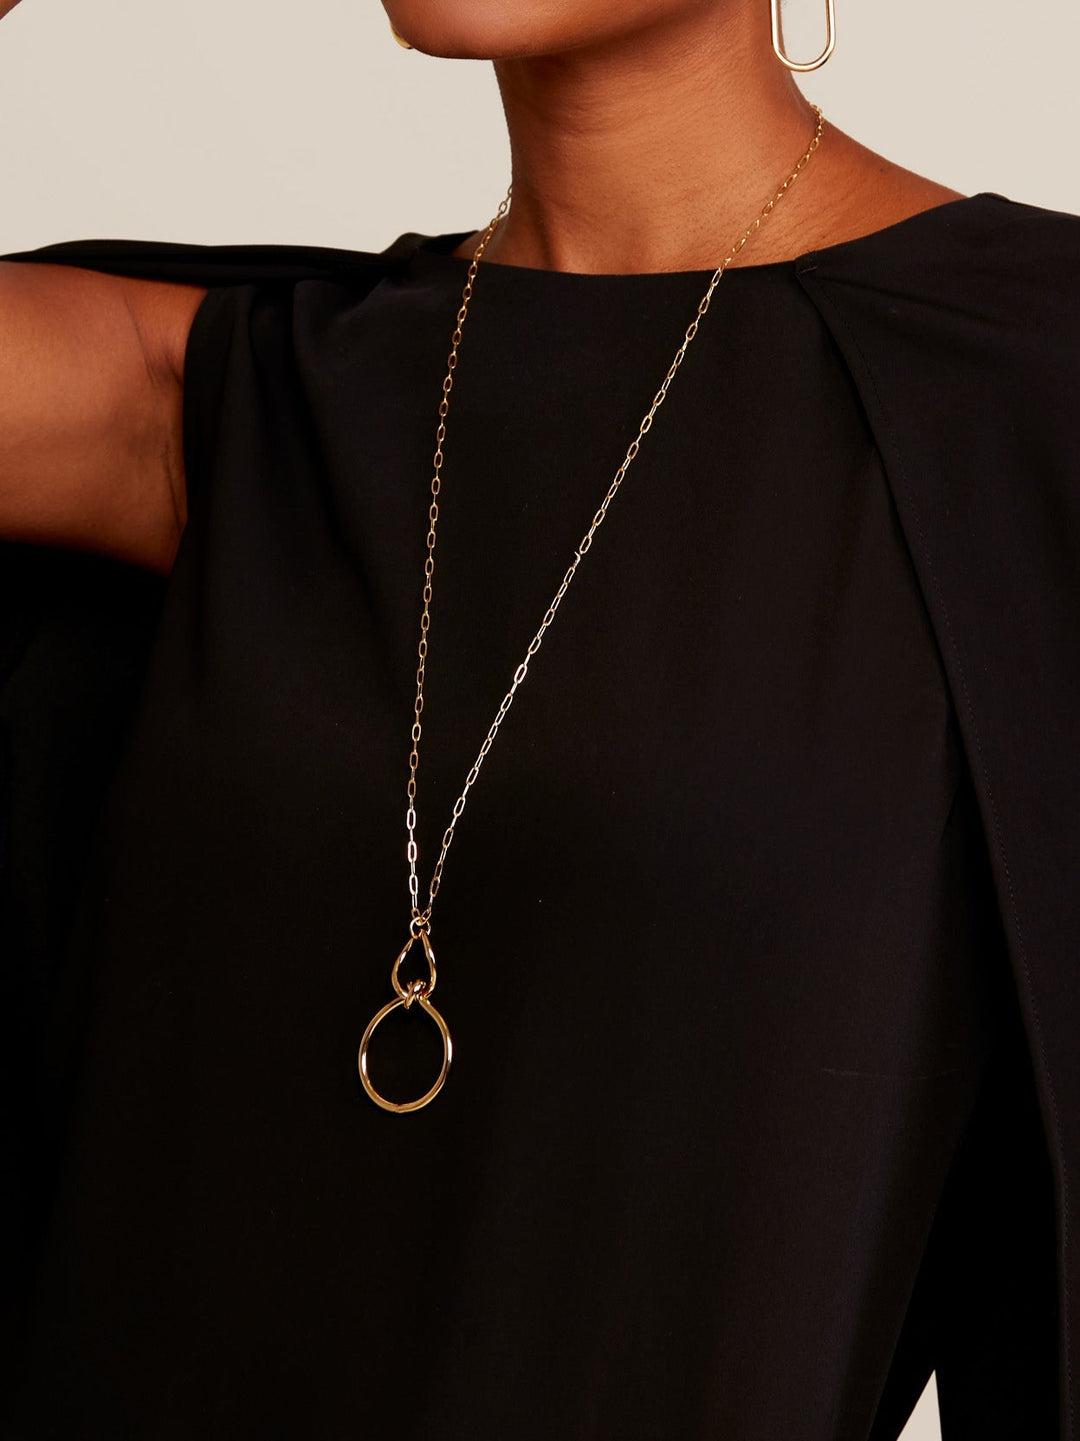 Zenzii - Infinity Knotted Links Necklace: Gold - Shorely Chic Boutique